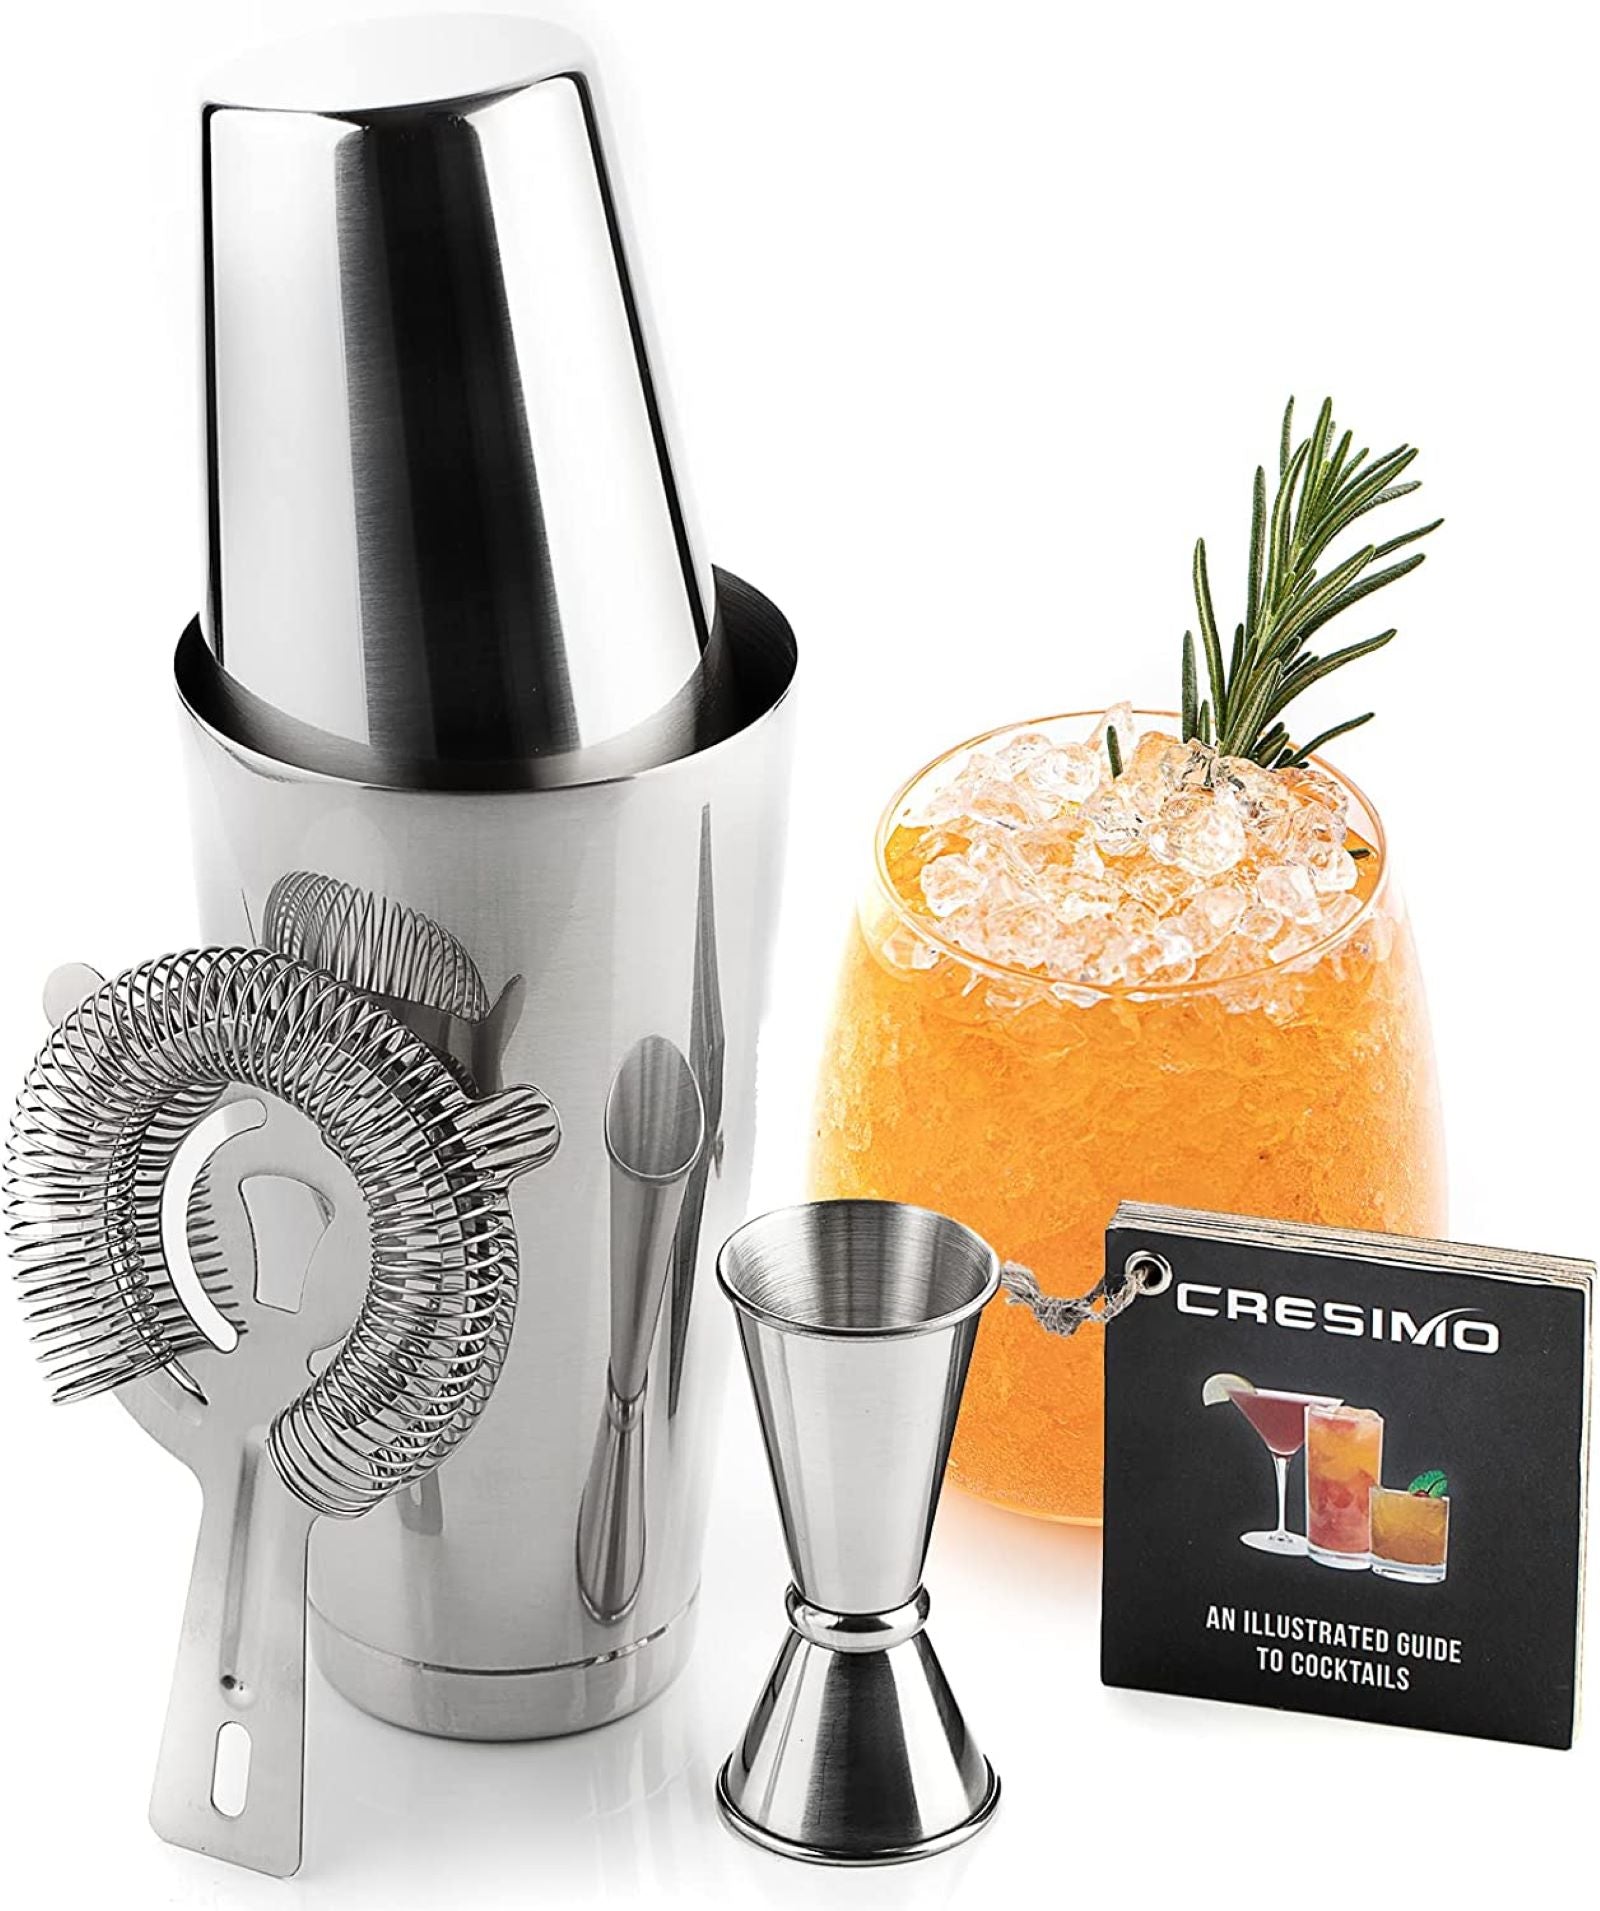 Stainless Steel Boston Shaker: 2-Piece Set: 18oz Unweighted & 28oz Weighted Professional Bartender Cocktail Shaker